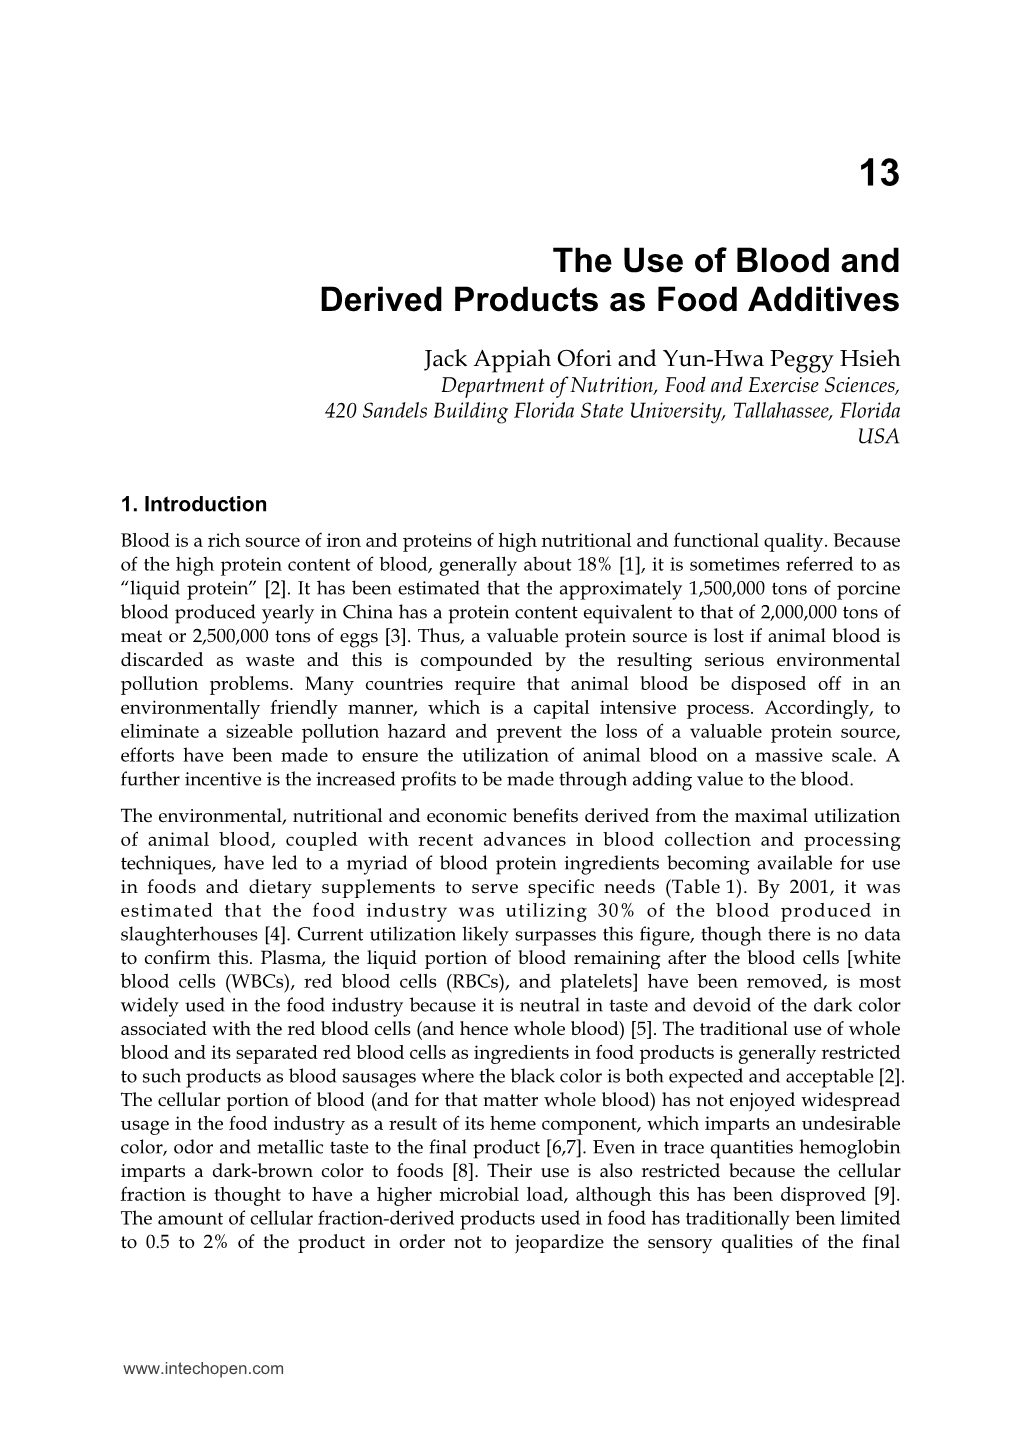 The Use of Blood and Derived Products As Food Additives